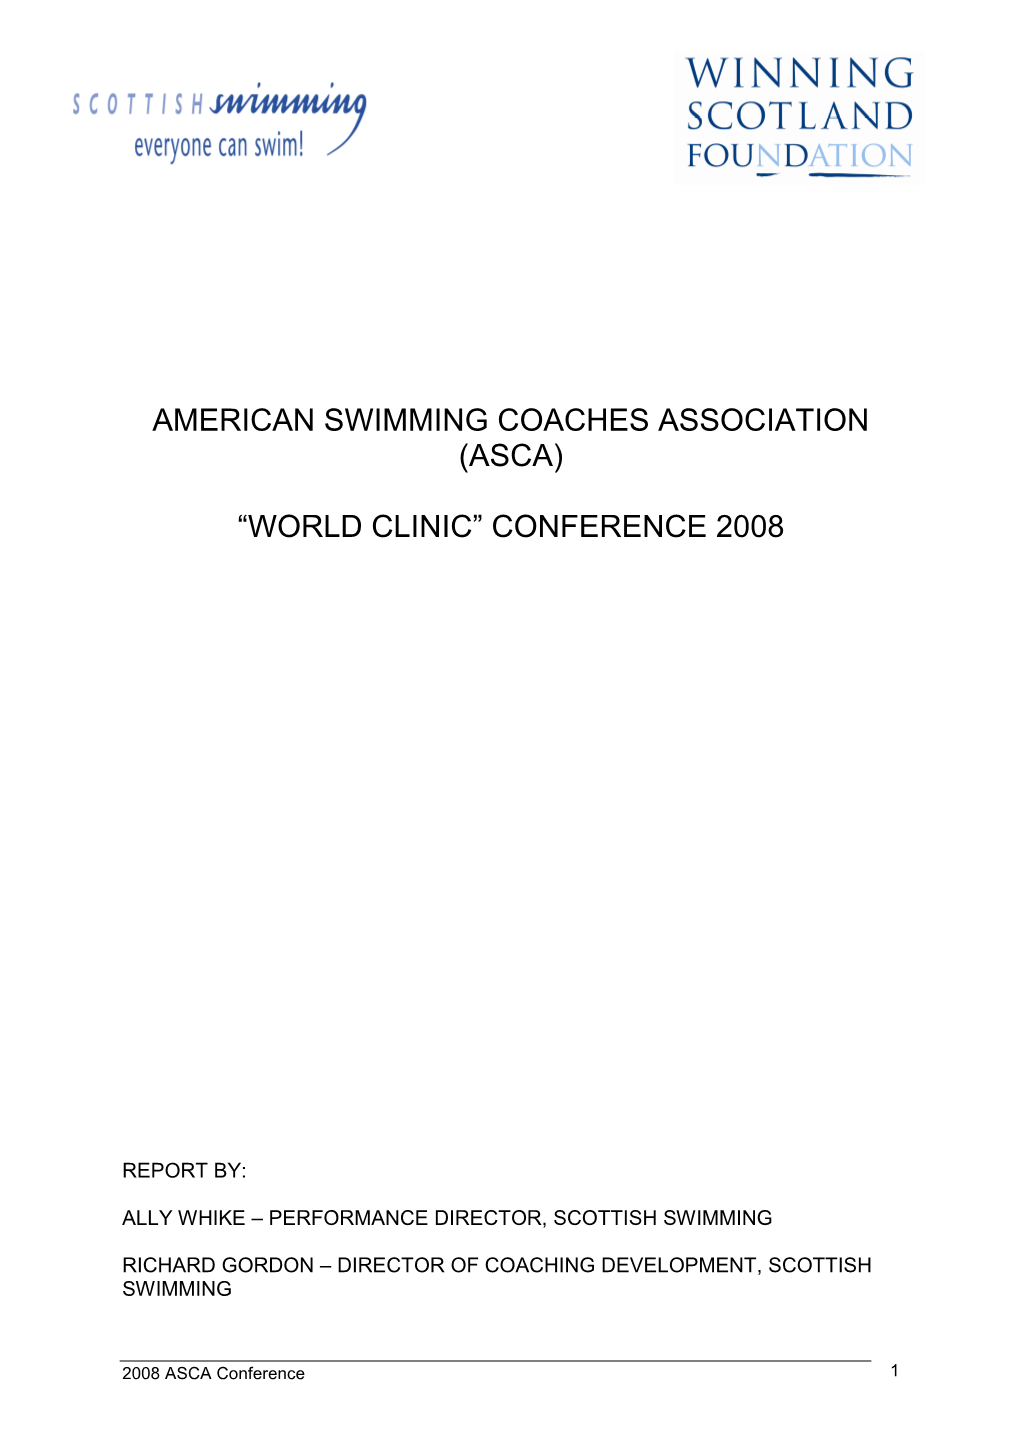 2008 ASCA Conference Report FINAL 6Jan09